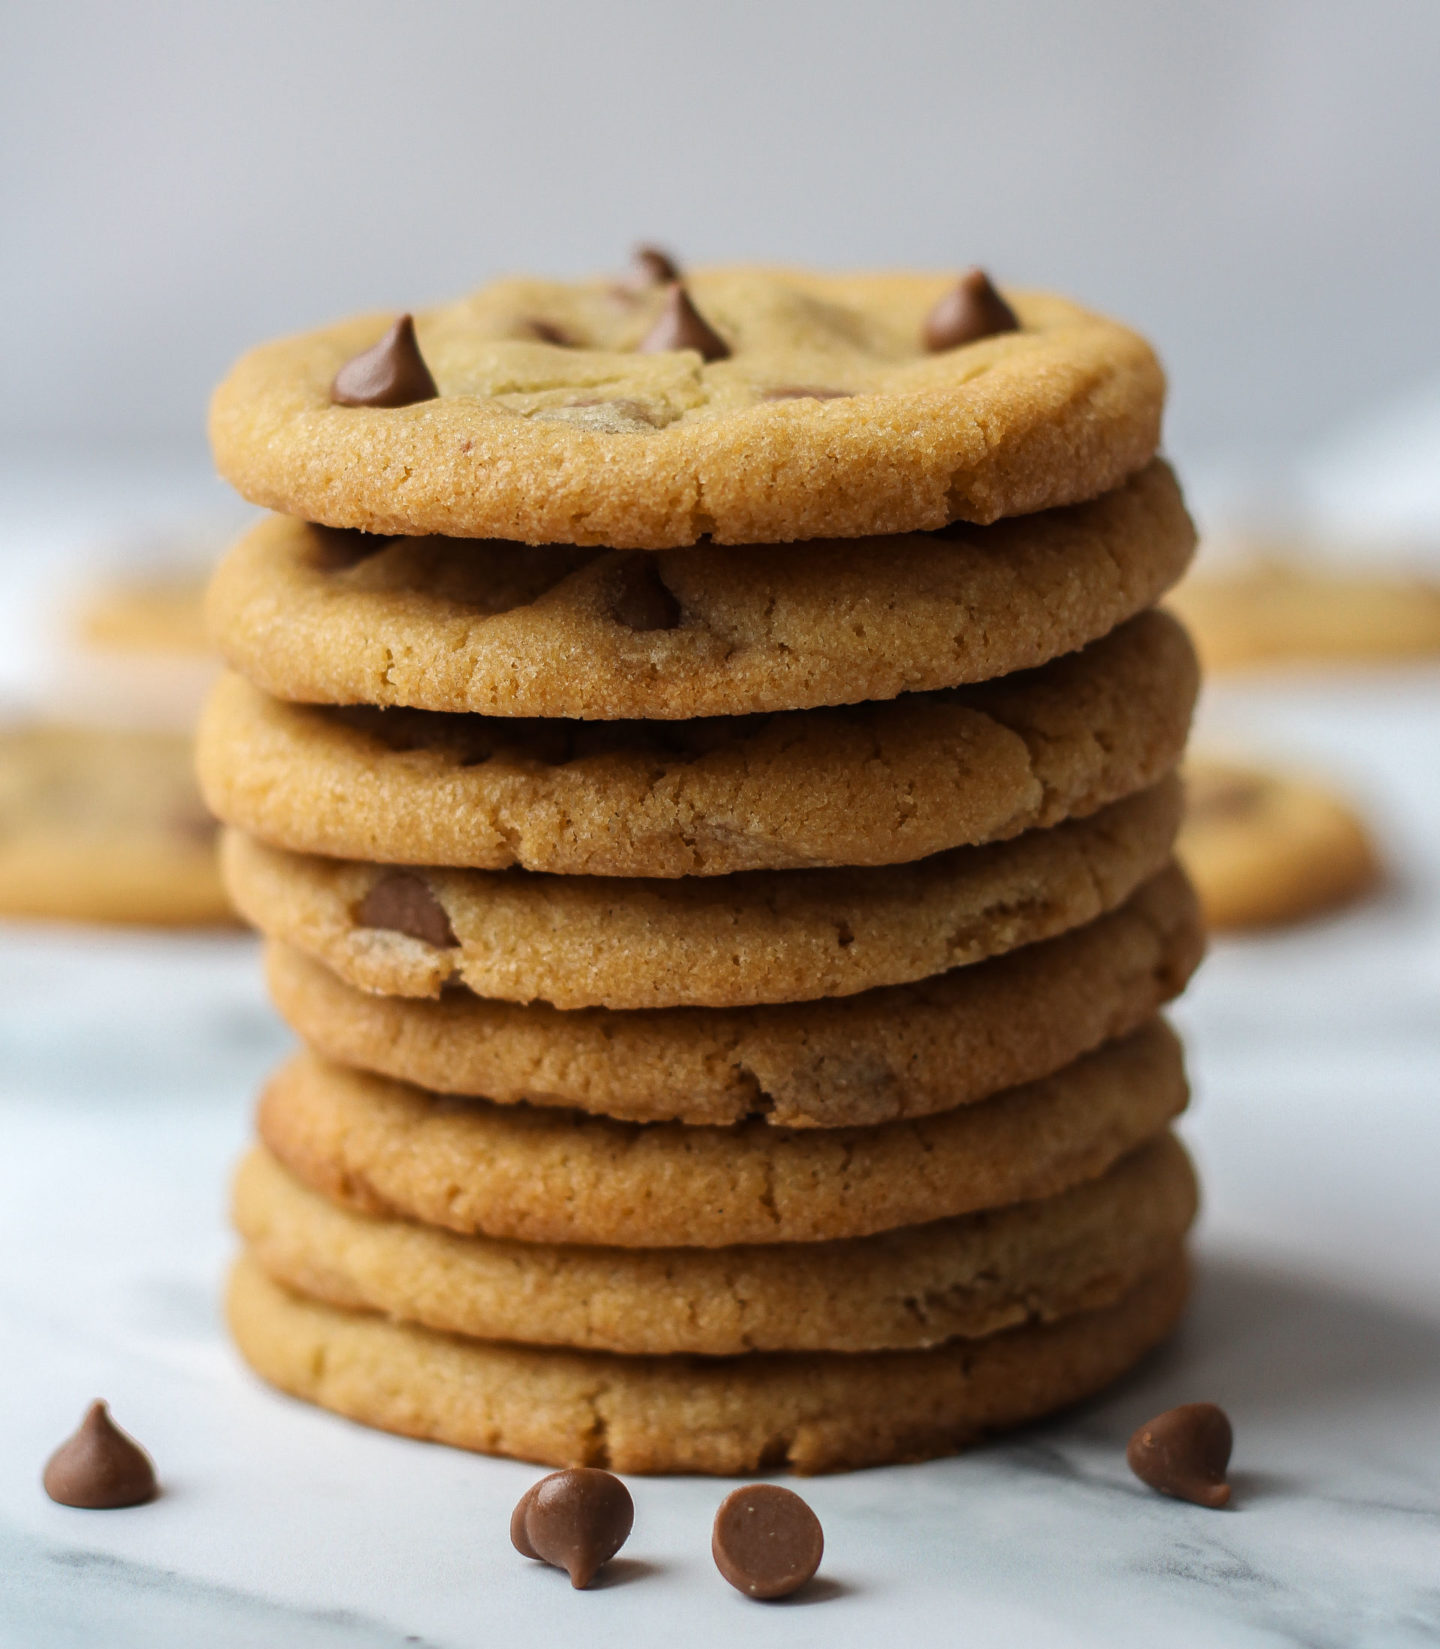 Tower of several chewy chocolate chip cookies